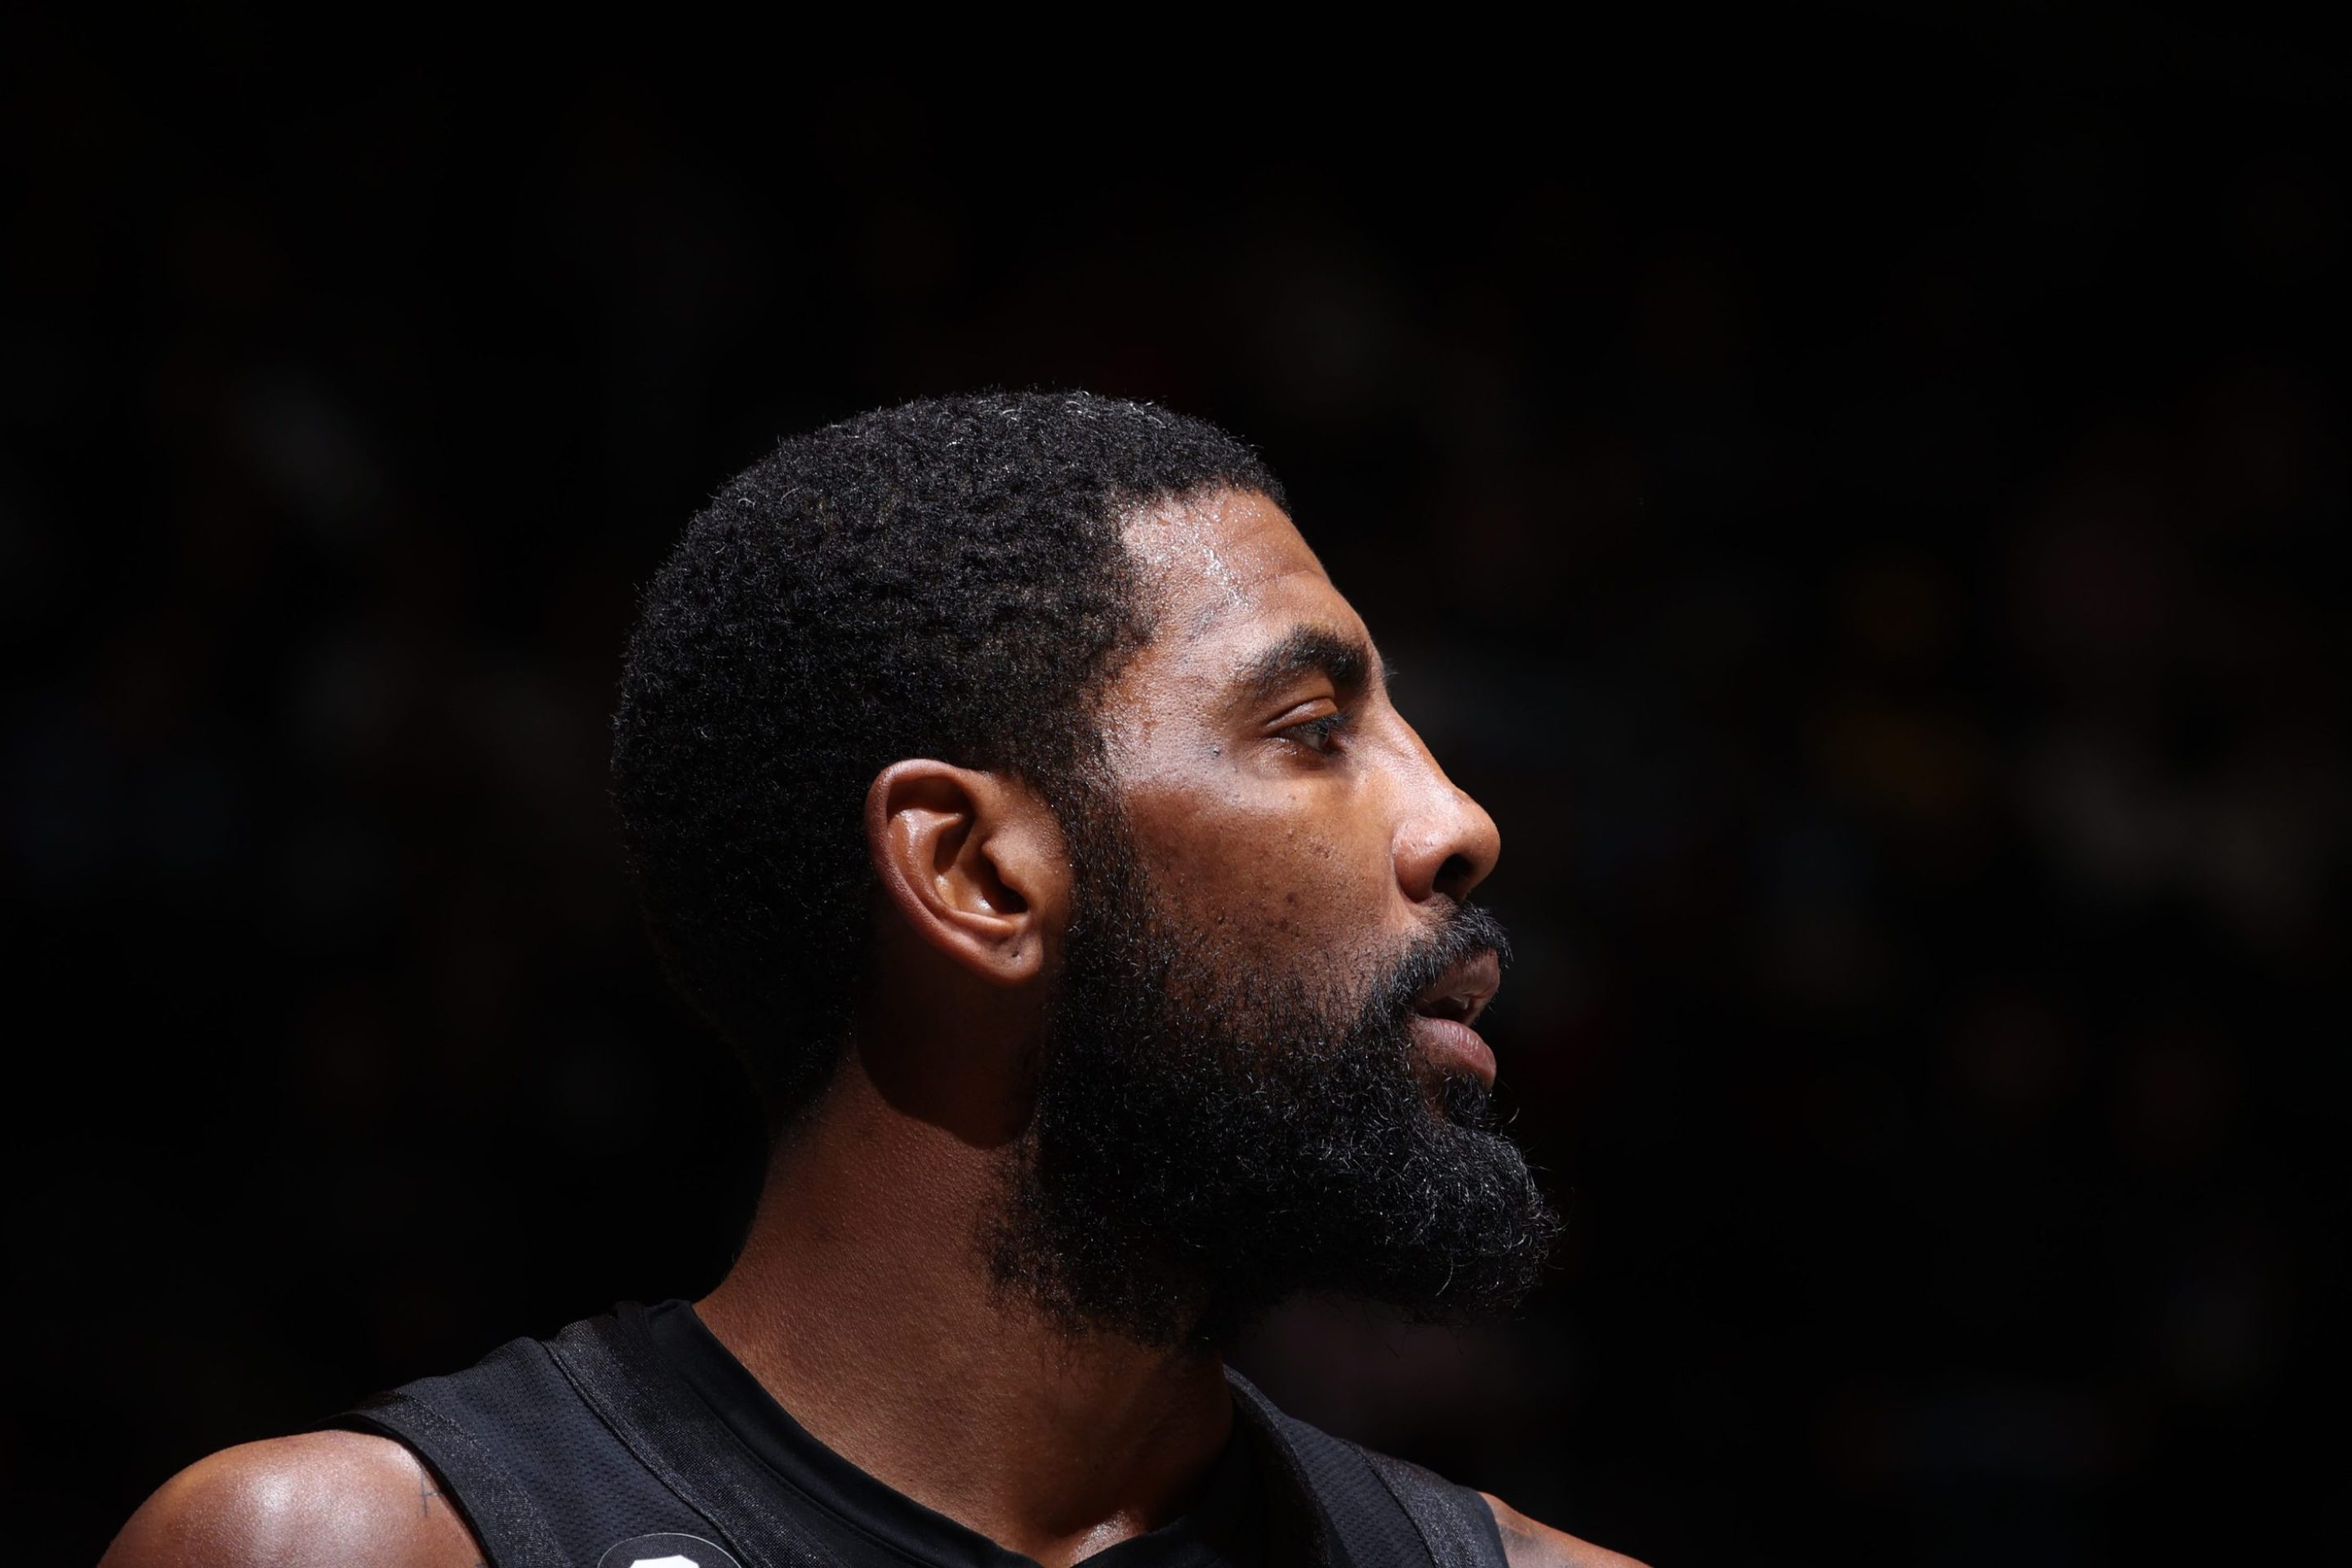 Kyrie Irving #11 of the Brooklyn Nets looks on during the game against the Indiana Pacers on October 31, 2022 at Barclays Center in Brooklyn, New York. The image is zoomed in on his face, which is turned to one side, and behind him is all black.